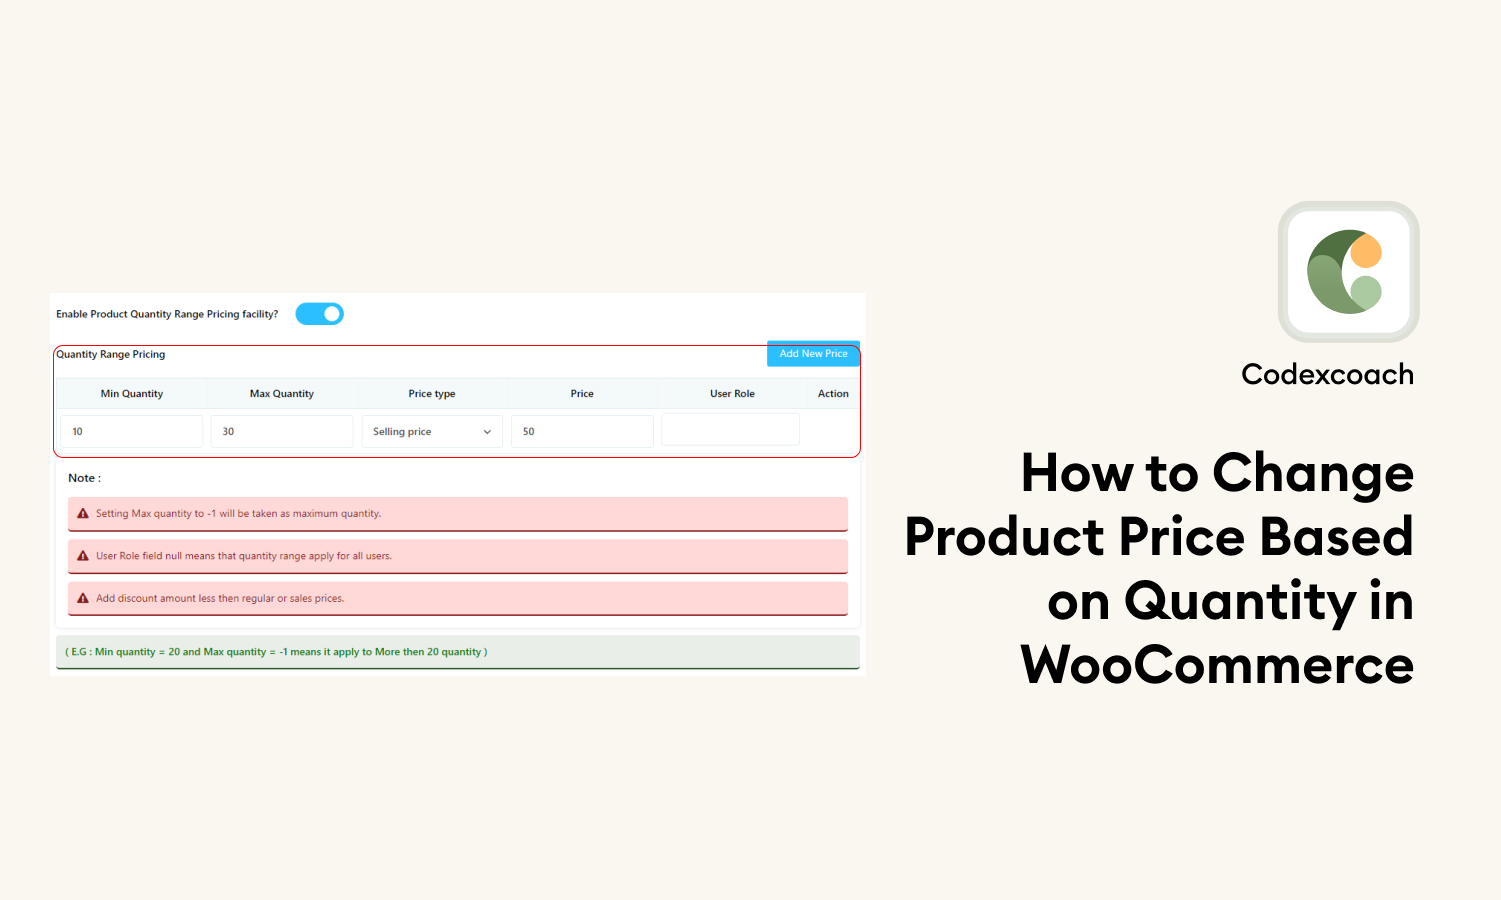 How to Change Product Price Based on Quantity in WooCommerce